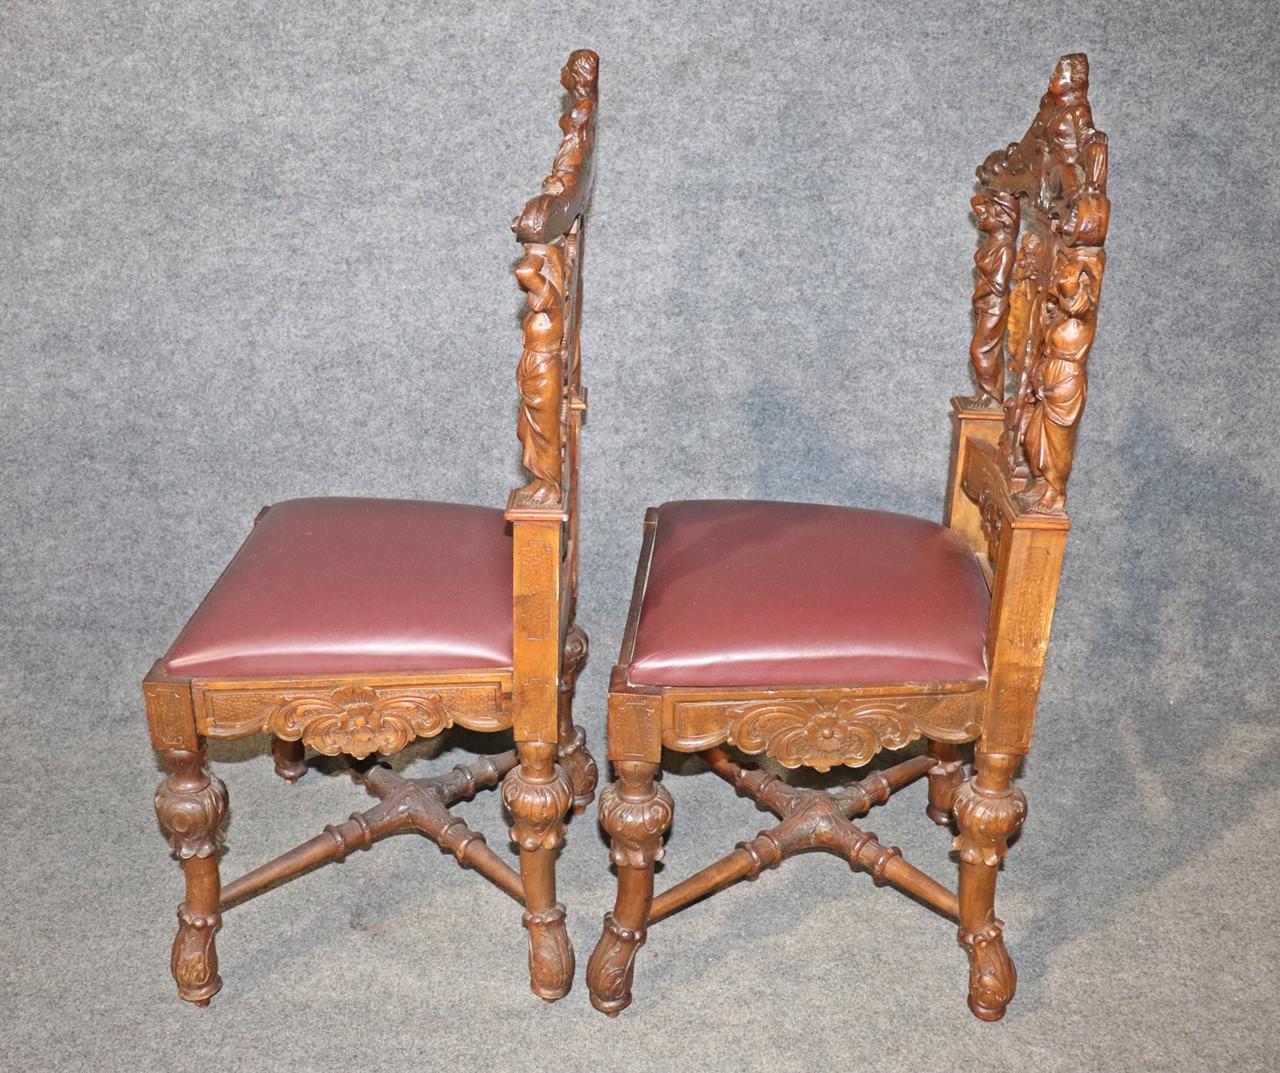 Pair of Figural Carved Walnut R.J. Horner Style Renaissance Chairs, circa 1880 For Sale 9